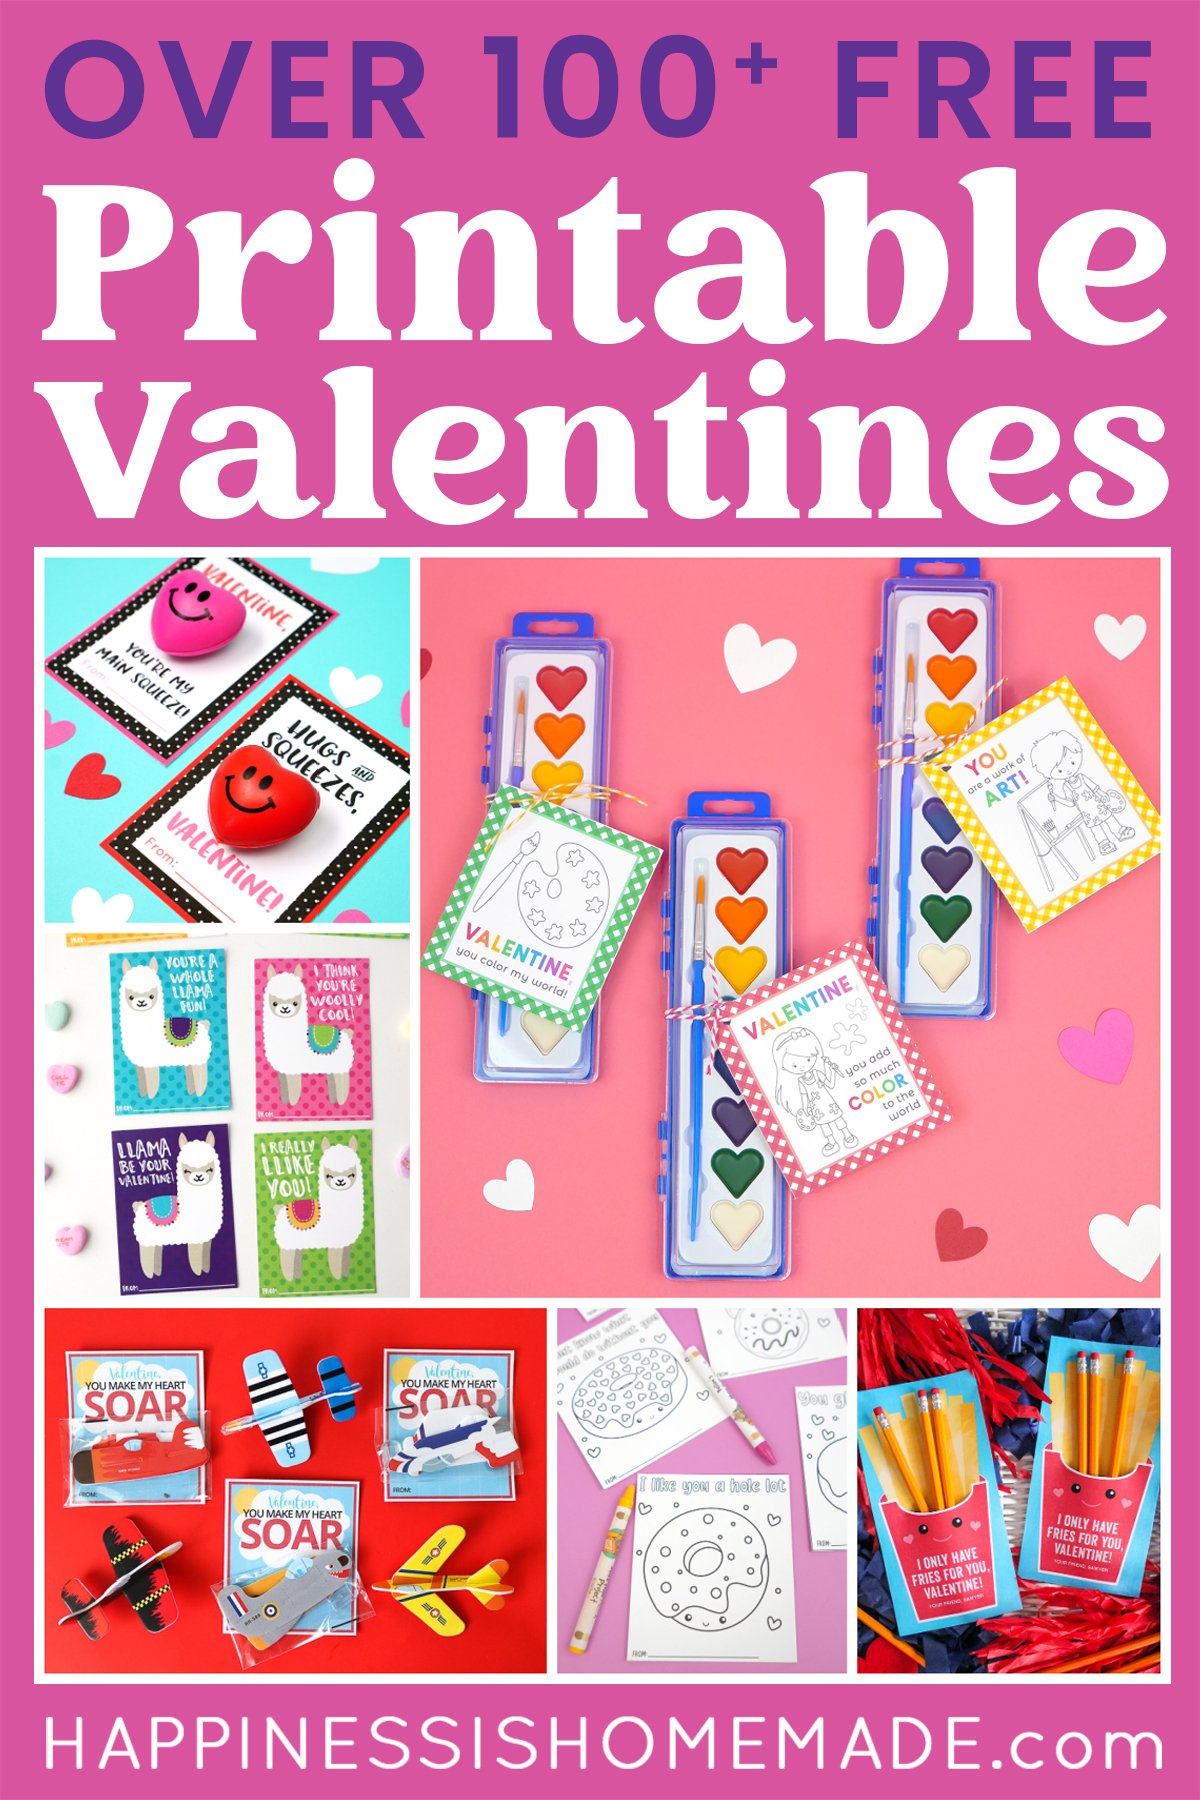 "Over 100+ Free Printable Valentines" graphic with collage of sample free Valentine's Day Cards